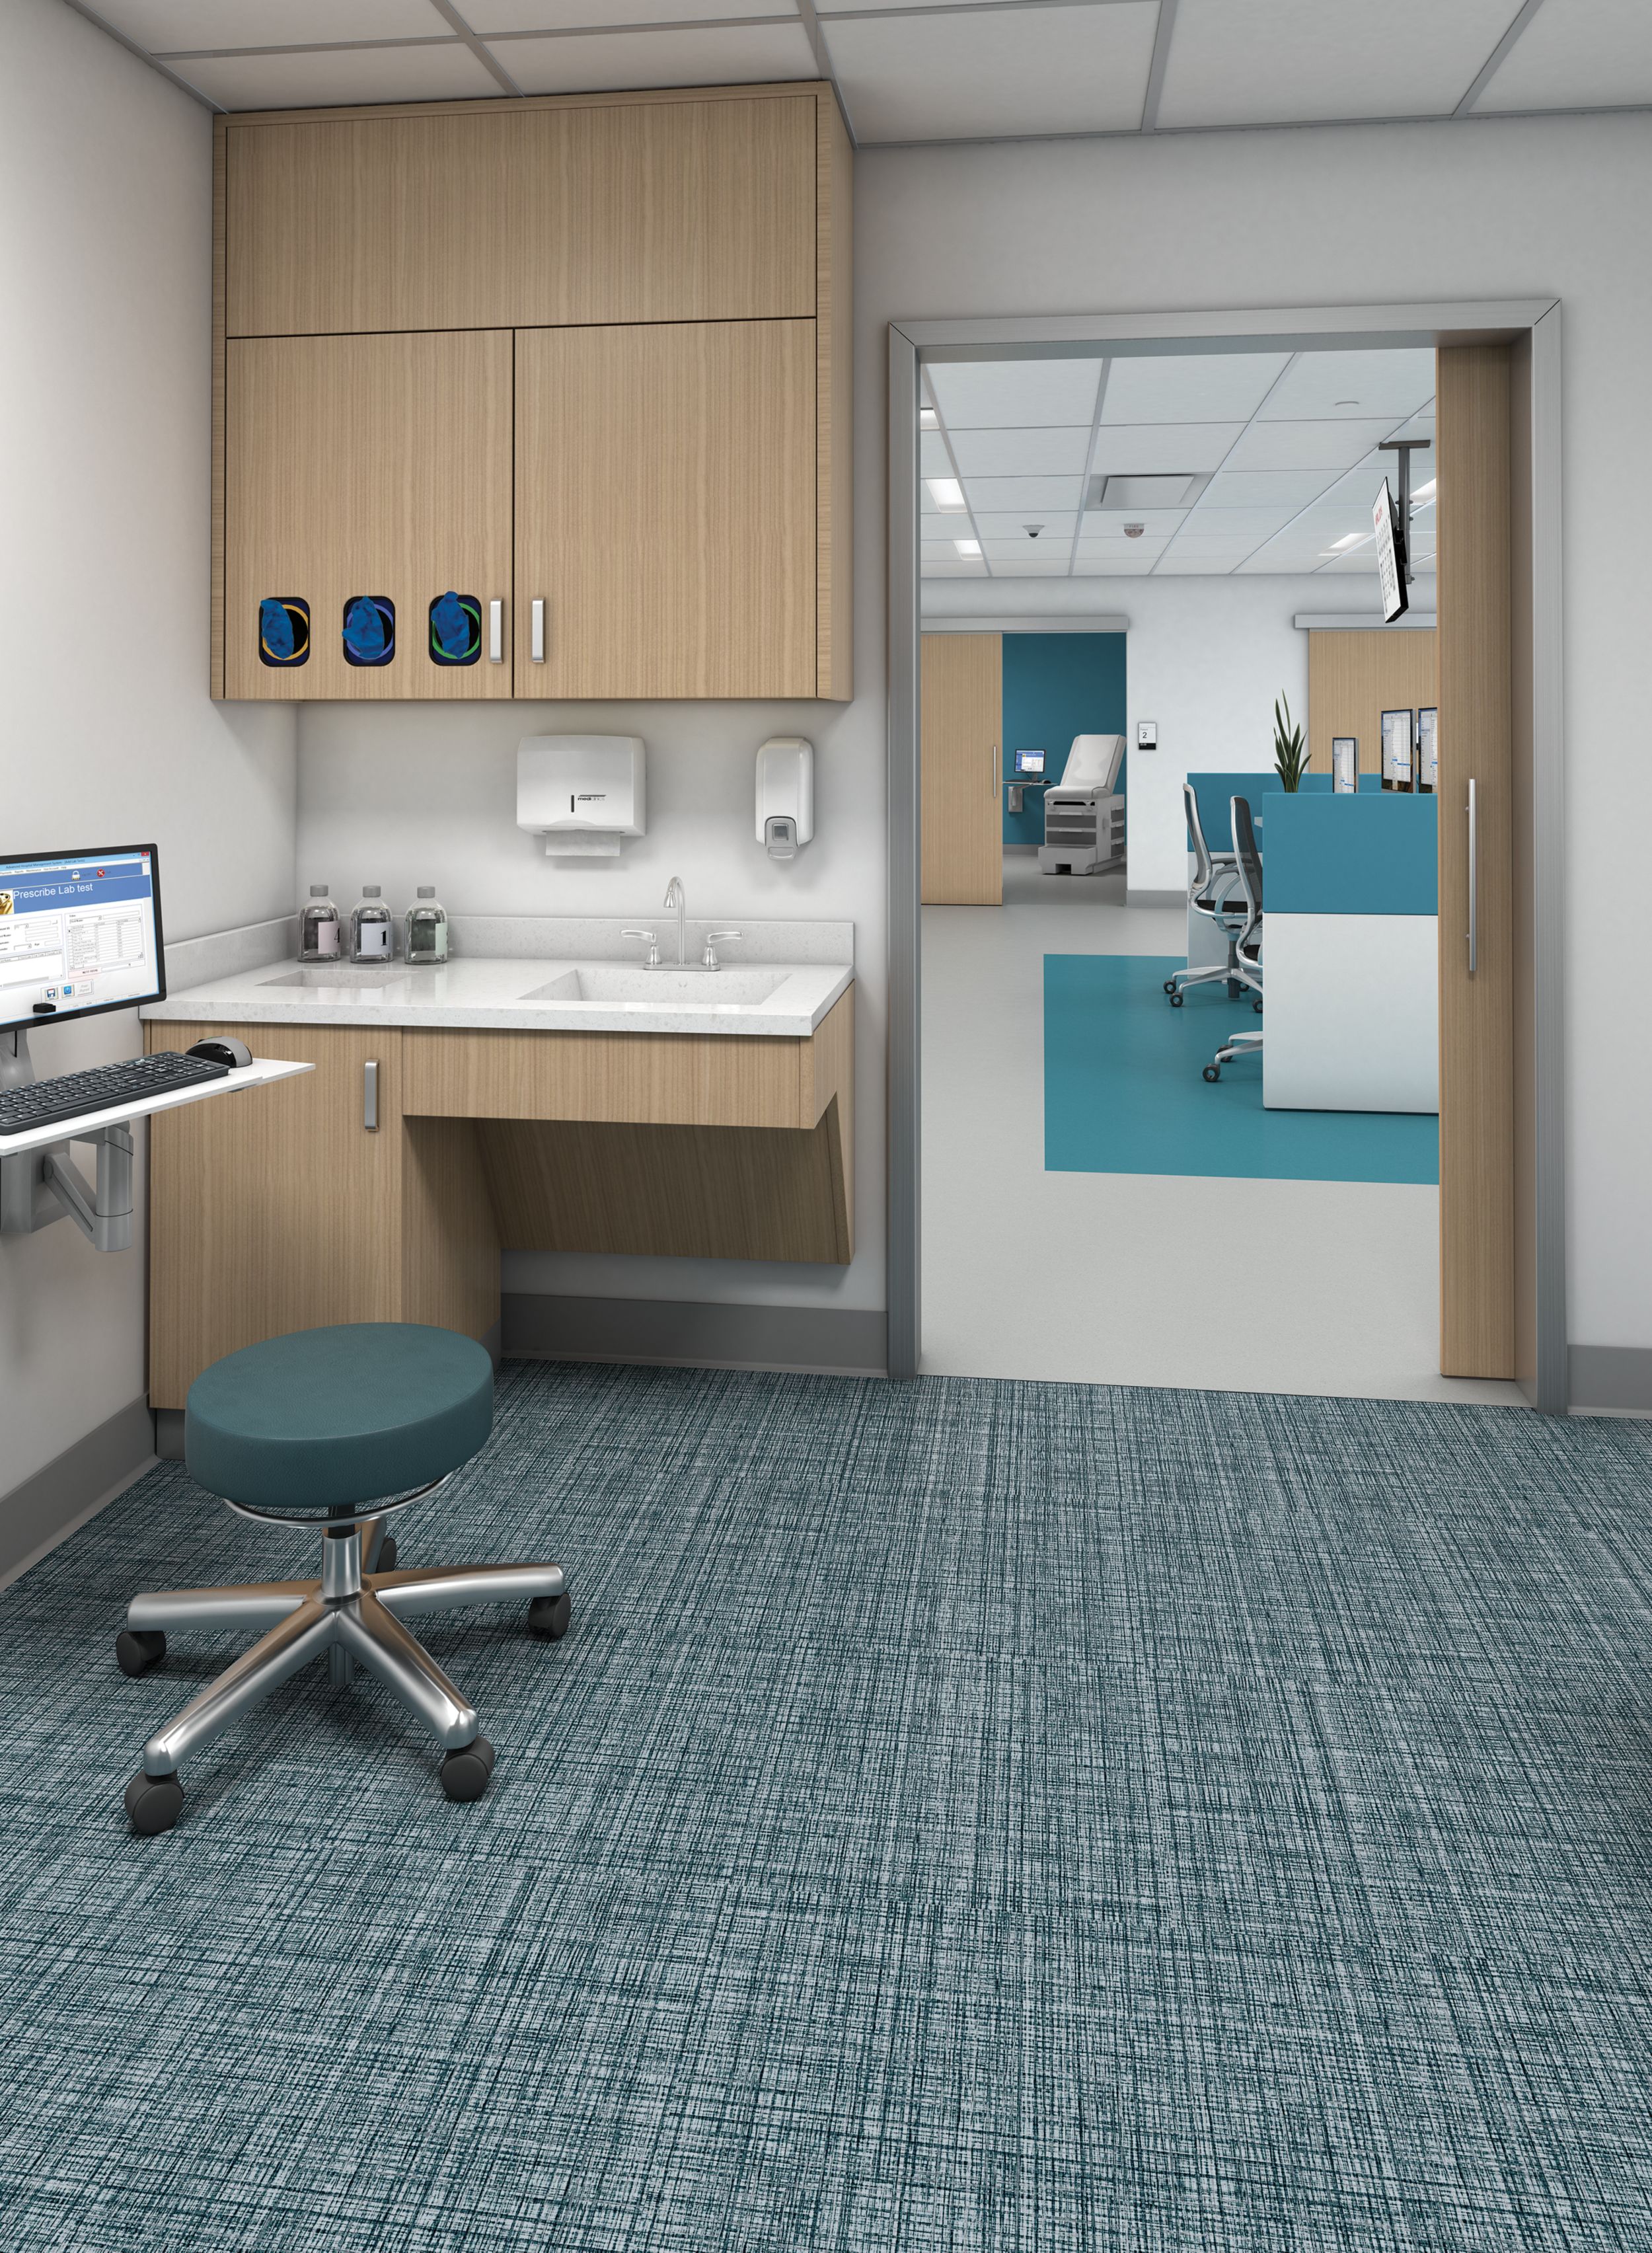 Interface Native Fabric LVT in exam room with nora by Interface sentica rubber flooring in outer area imagen número 15